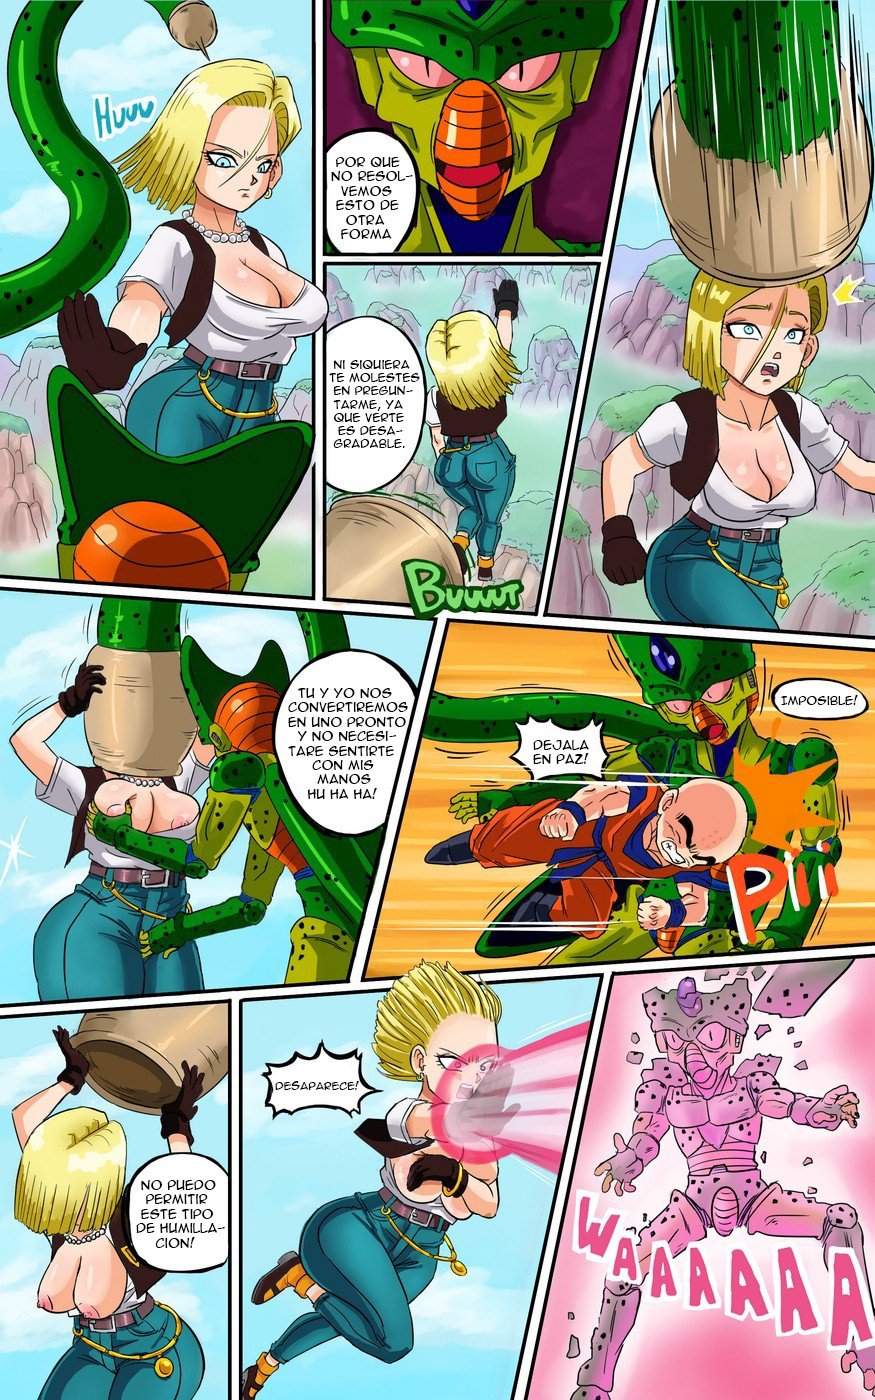 Android 18 meets Krillin - 6